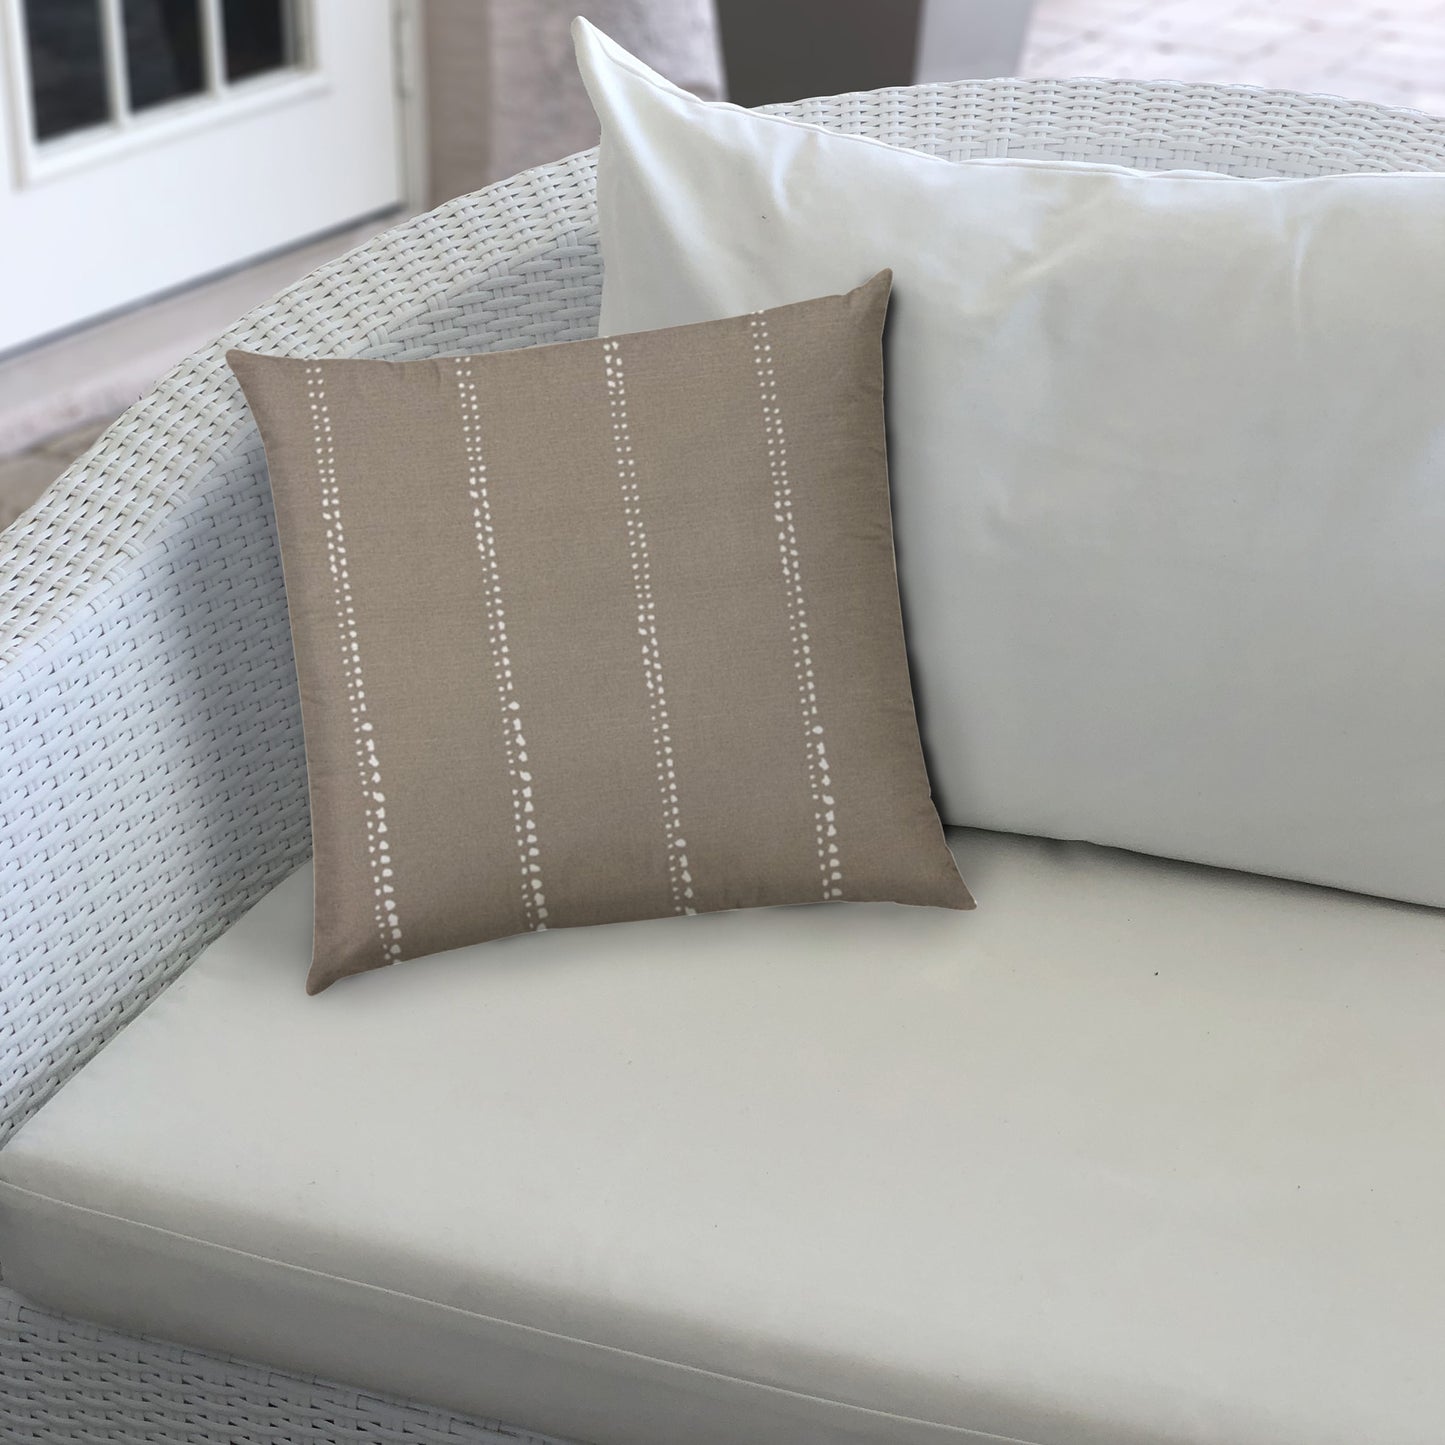 DRIZZLE Taupe Indoor/Outdoor Pillow - Sewn Closure